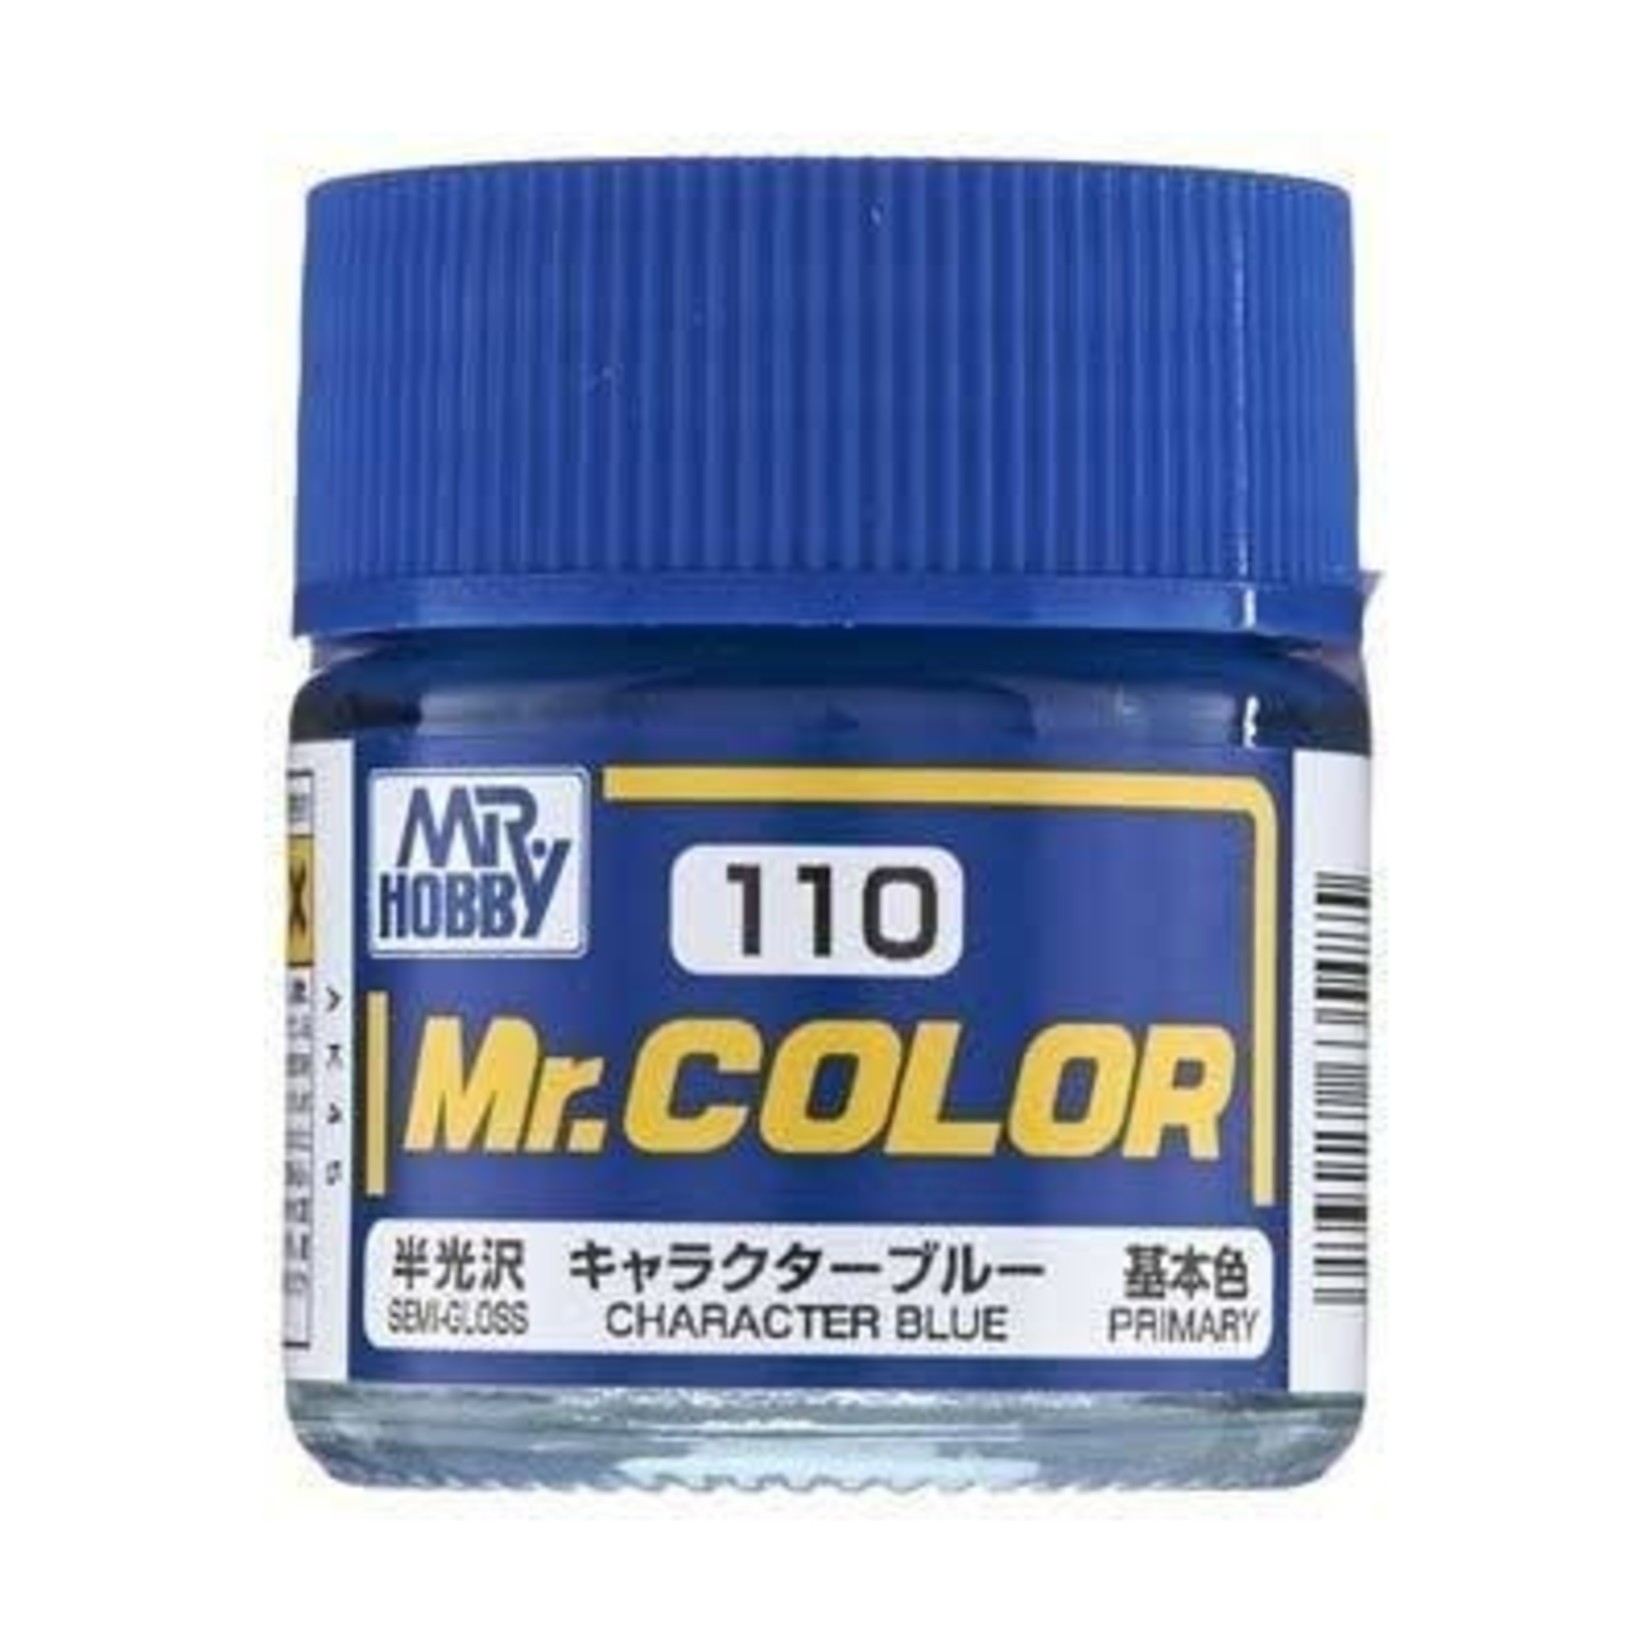 GSI Creos GNZ-C110 Mr Hobby C110  Semi Gloss Character Blue - Lacquer - 10ml